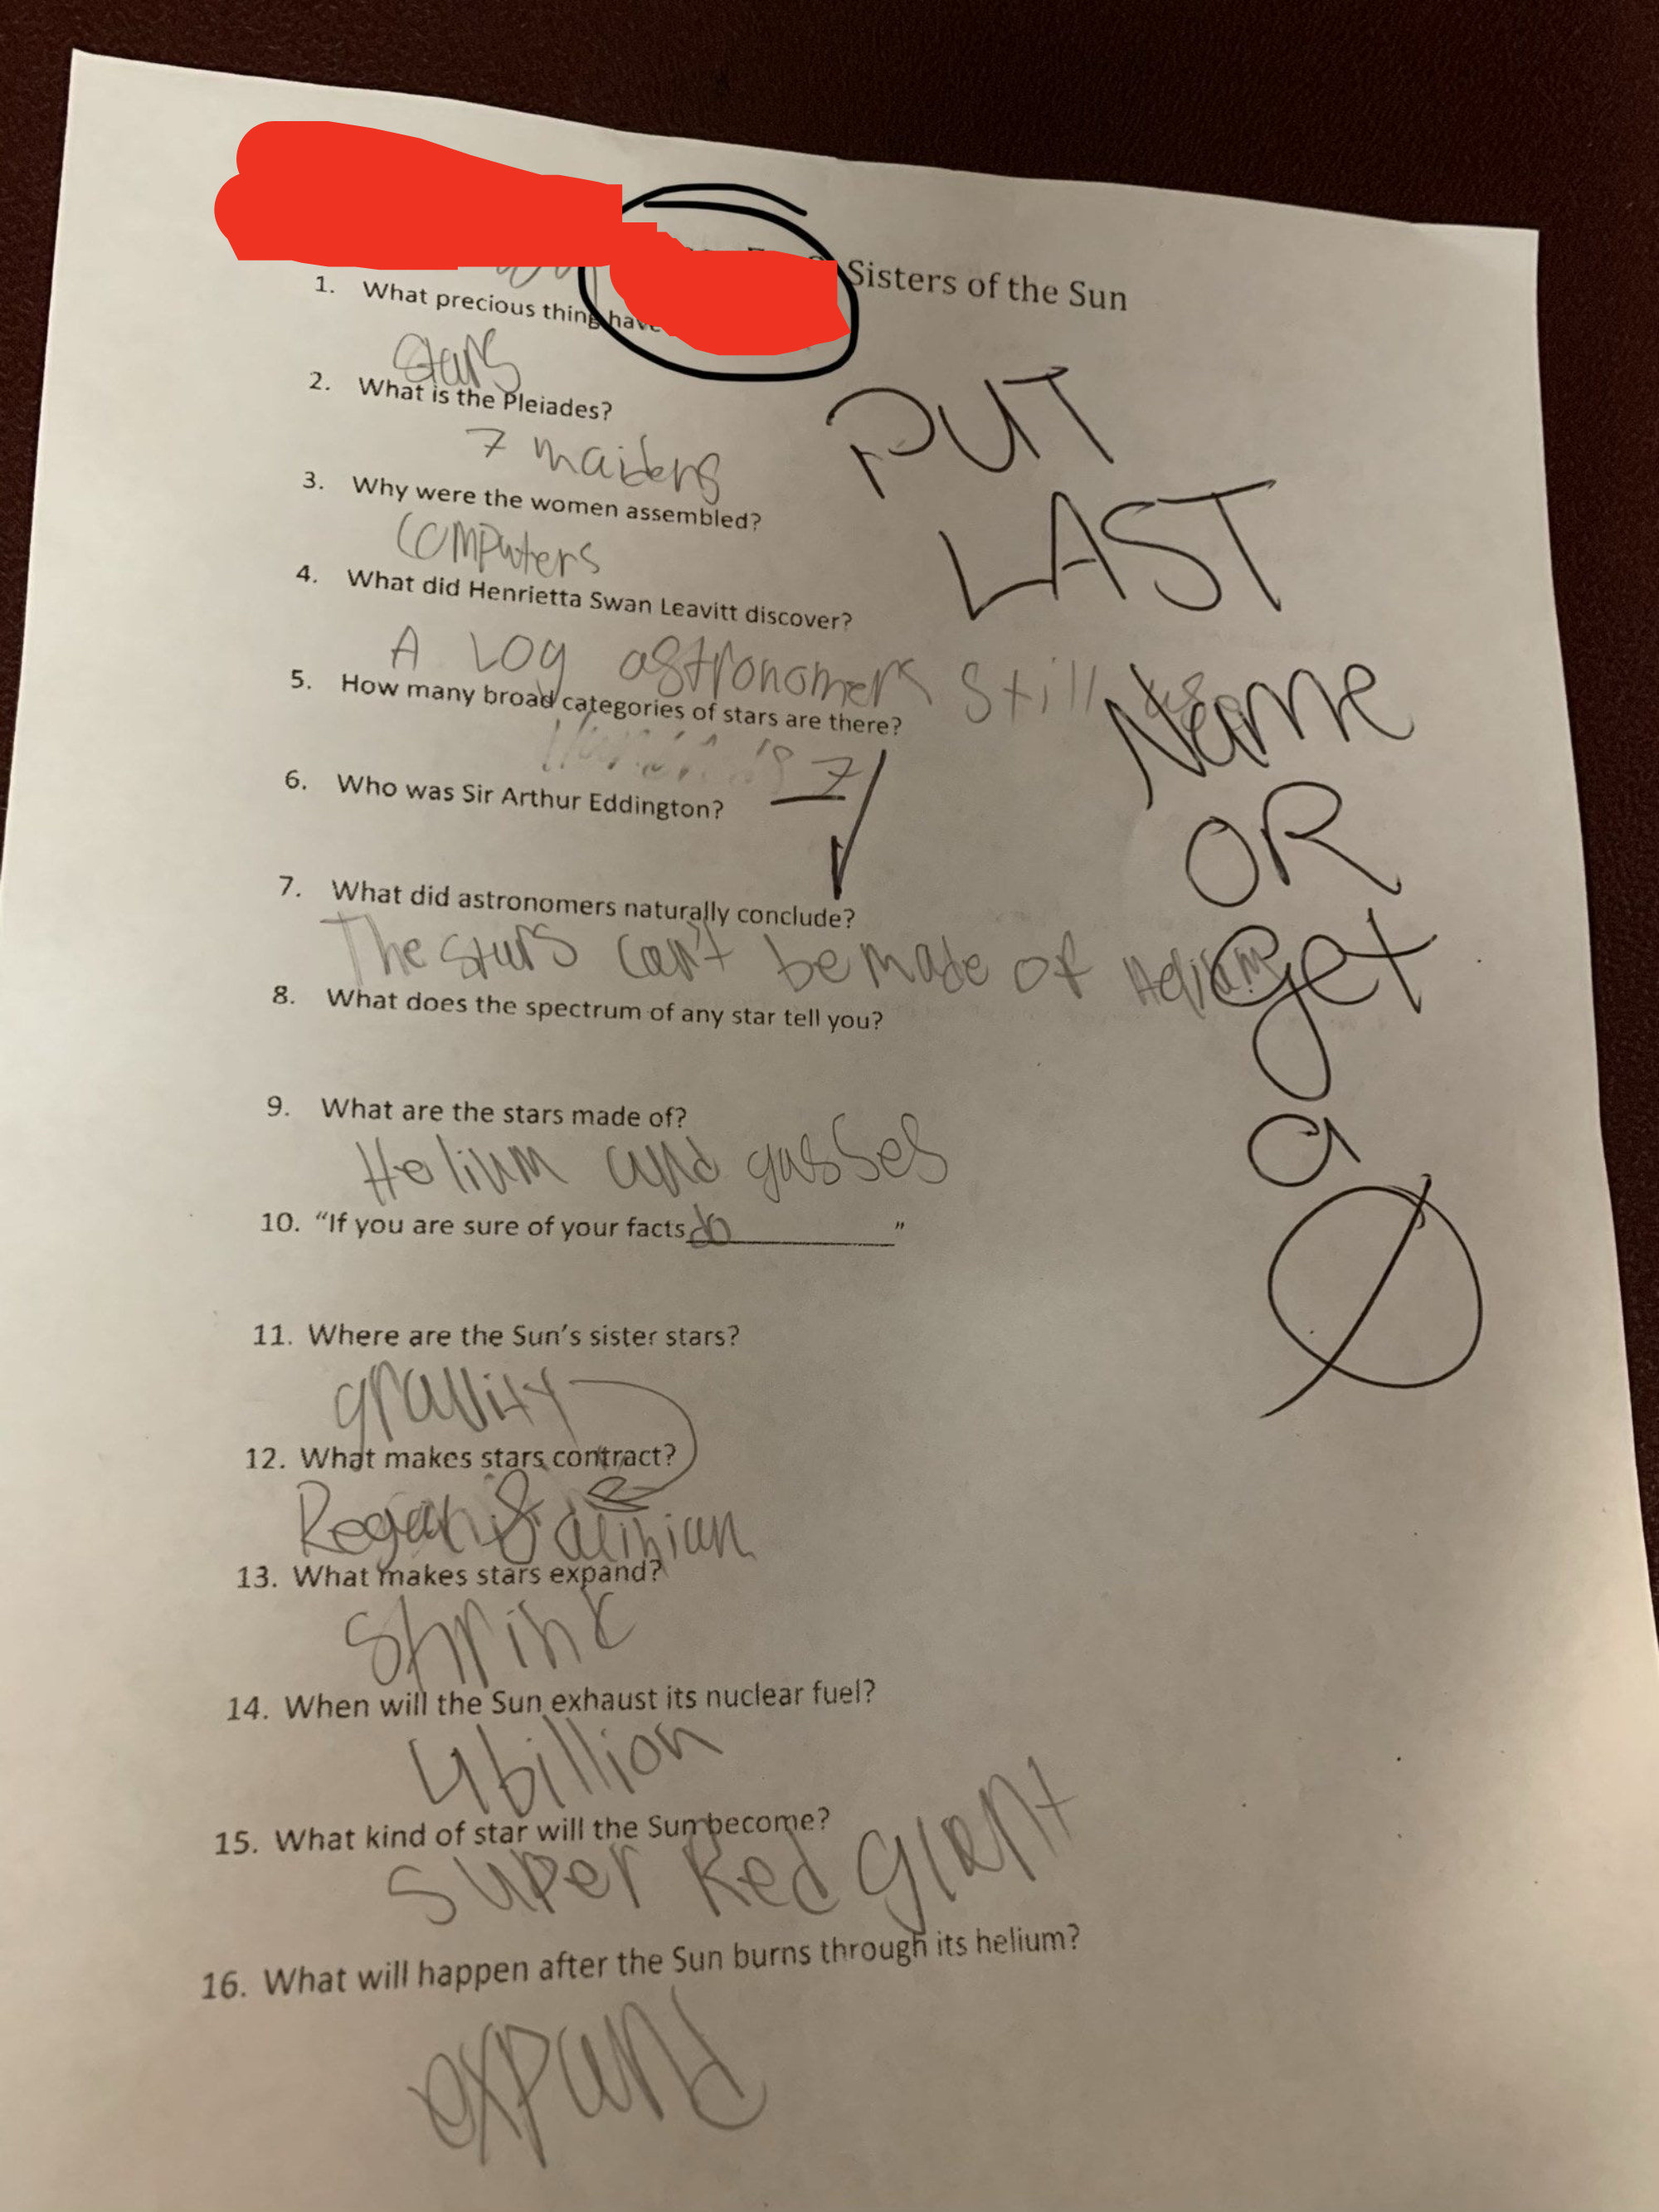 A teacher writing a note on a student&#x27;s assignment that reads: &quot;Put last name or get a 0&quot;